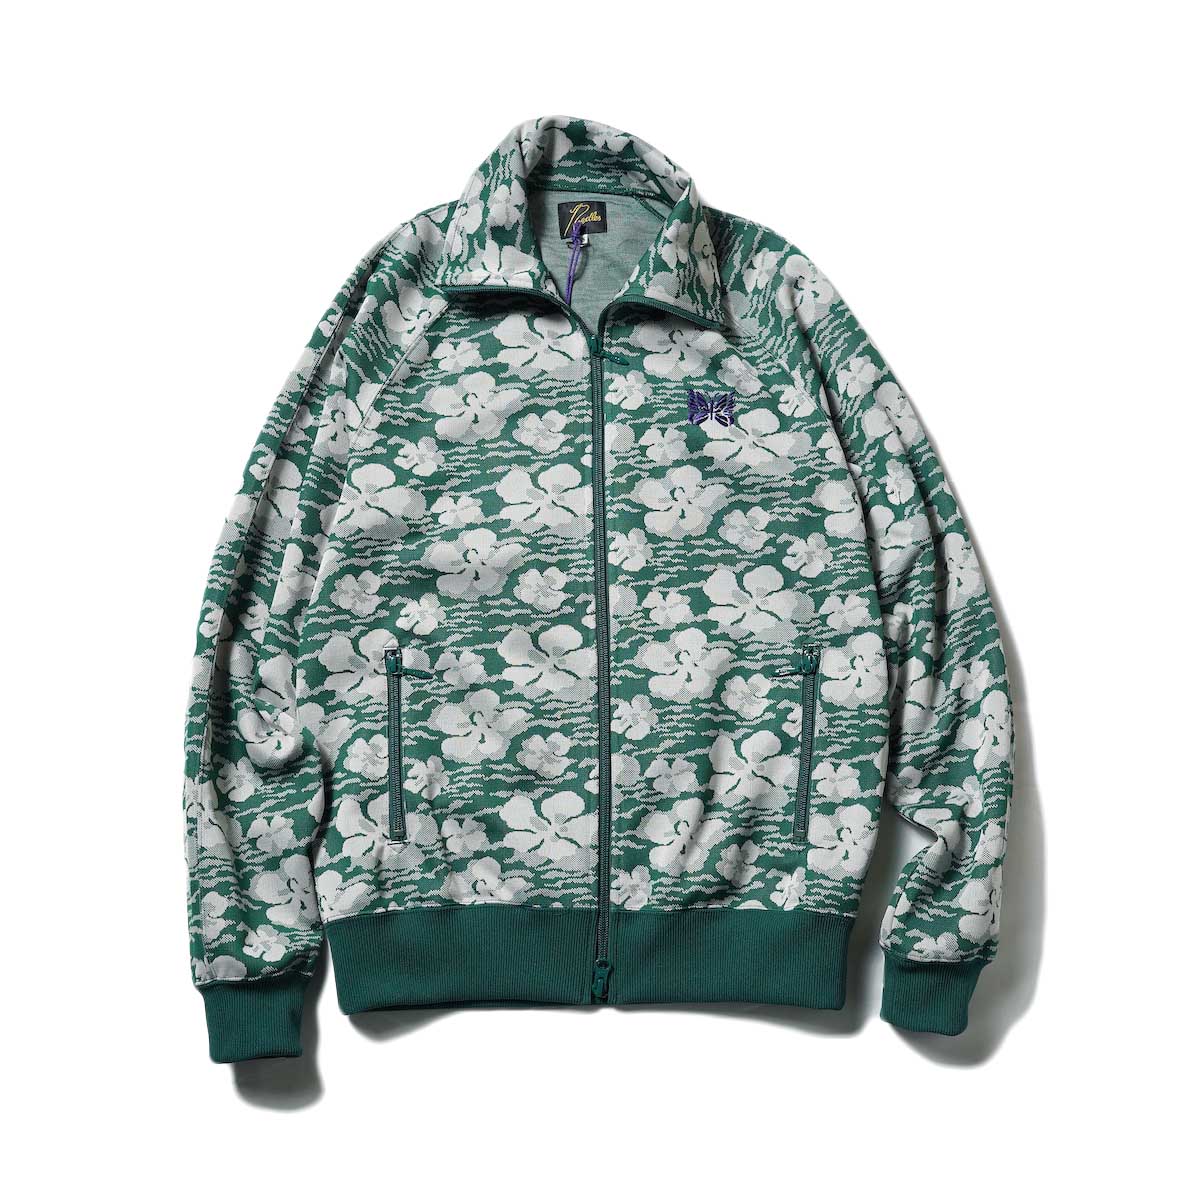 Needles / TRACK JACKET - POLY JQ (Floral)正面